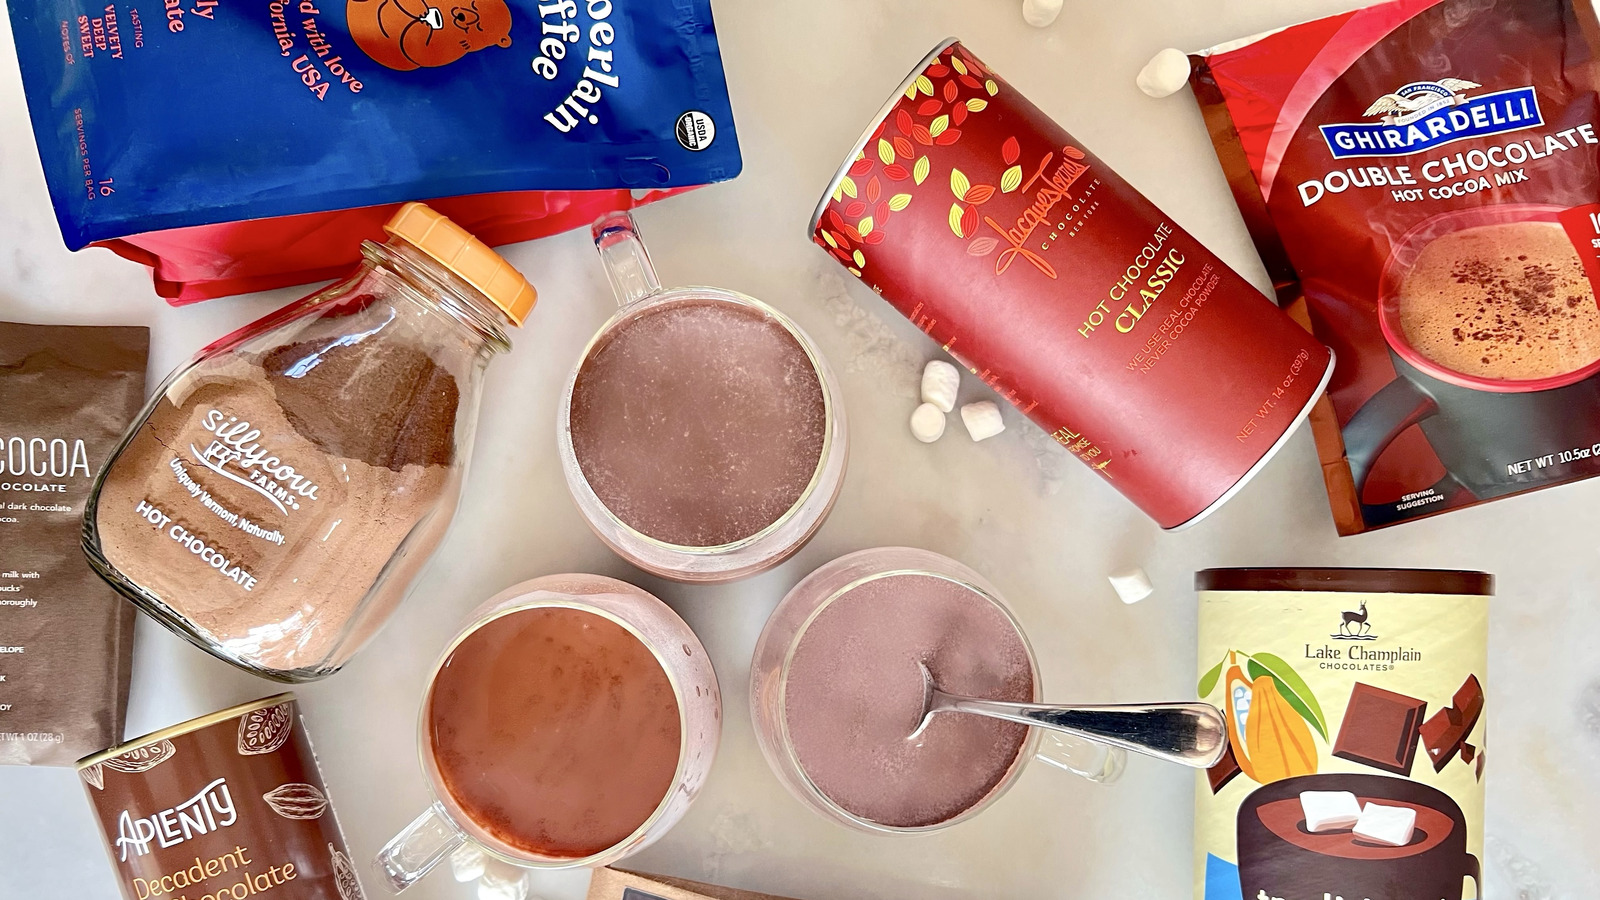 https://www.tastingtable.com/img/gallery/19-hot-cocoa-mixes-ranked-from-worst-to-best/l-intro-1668269613.jpg